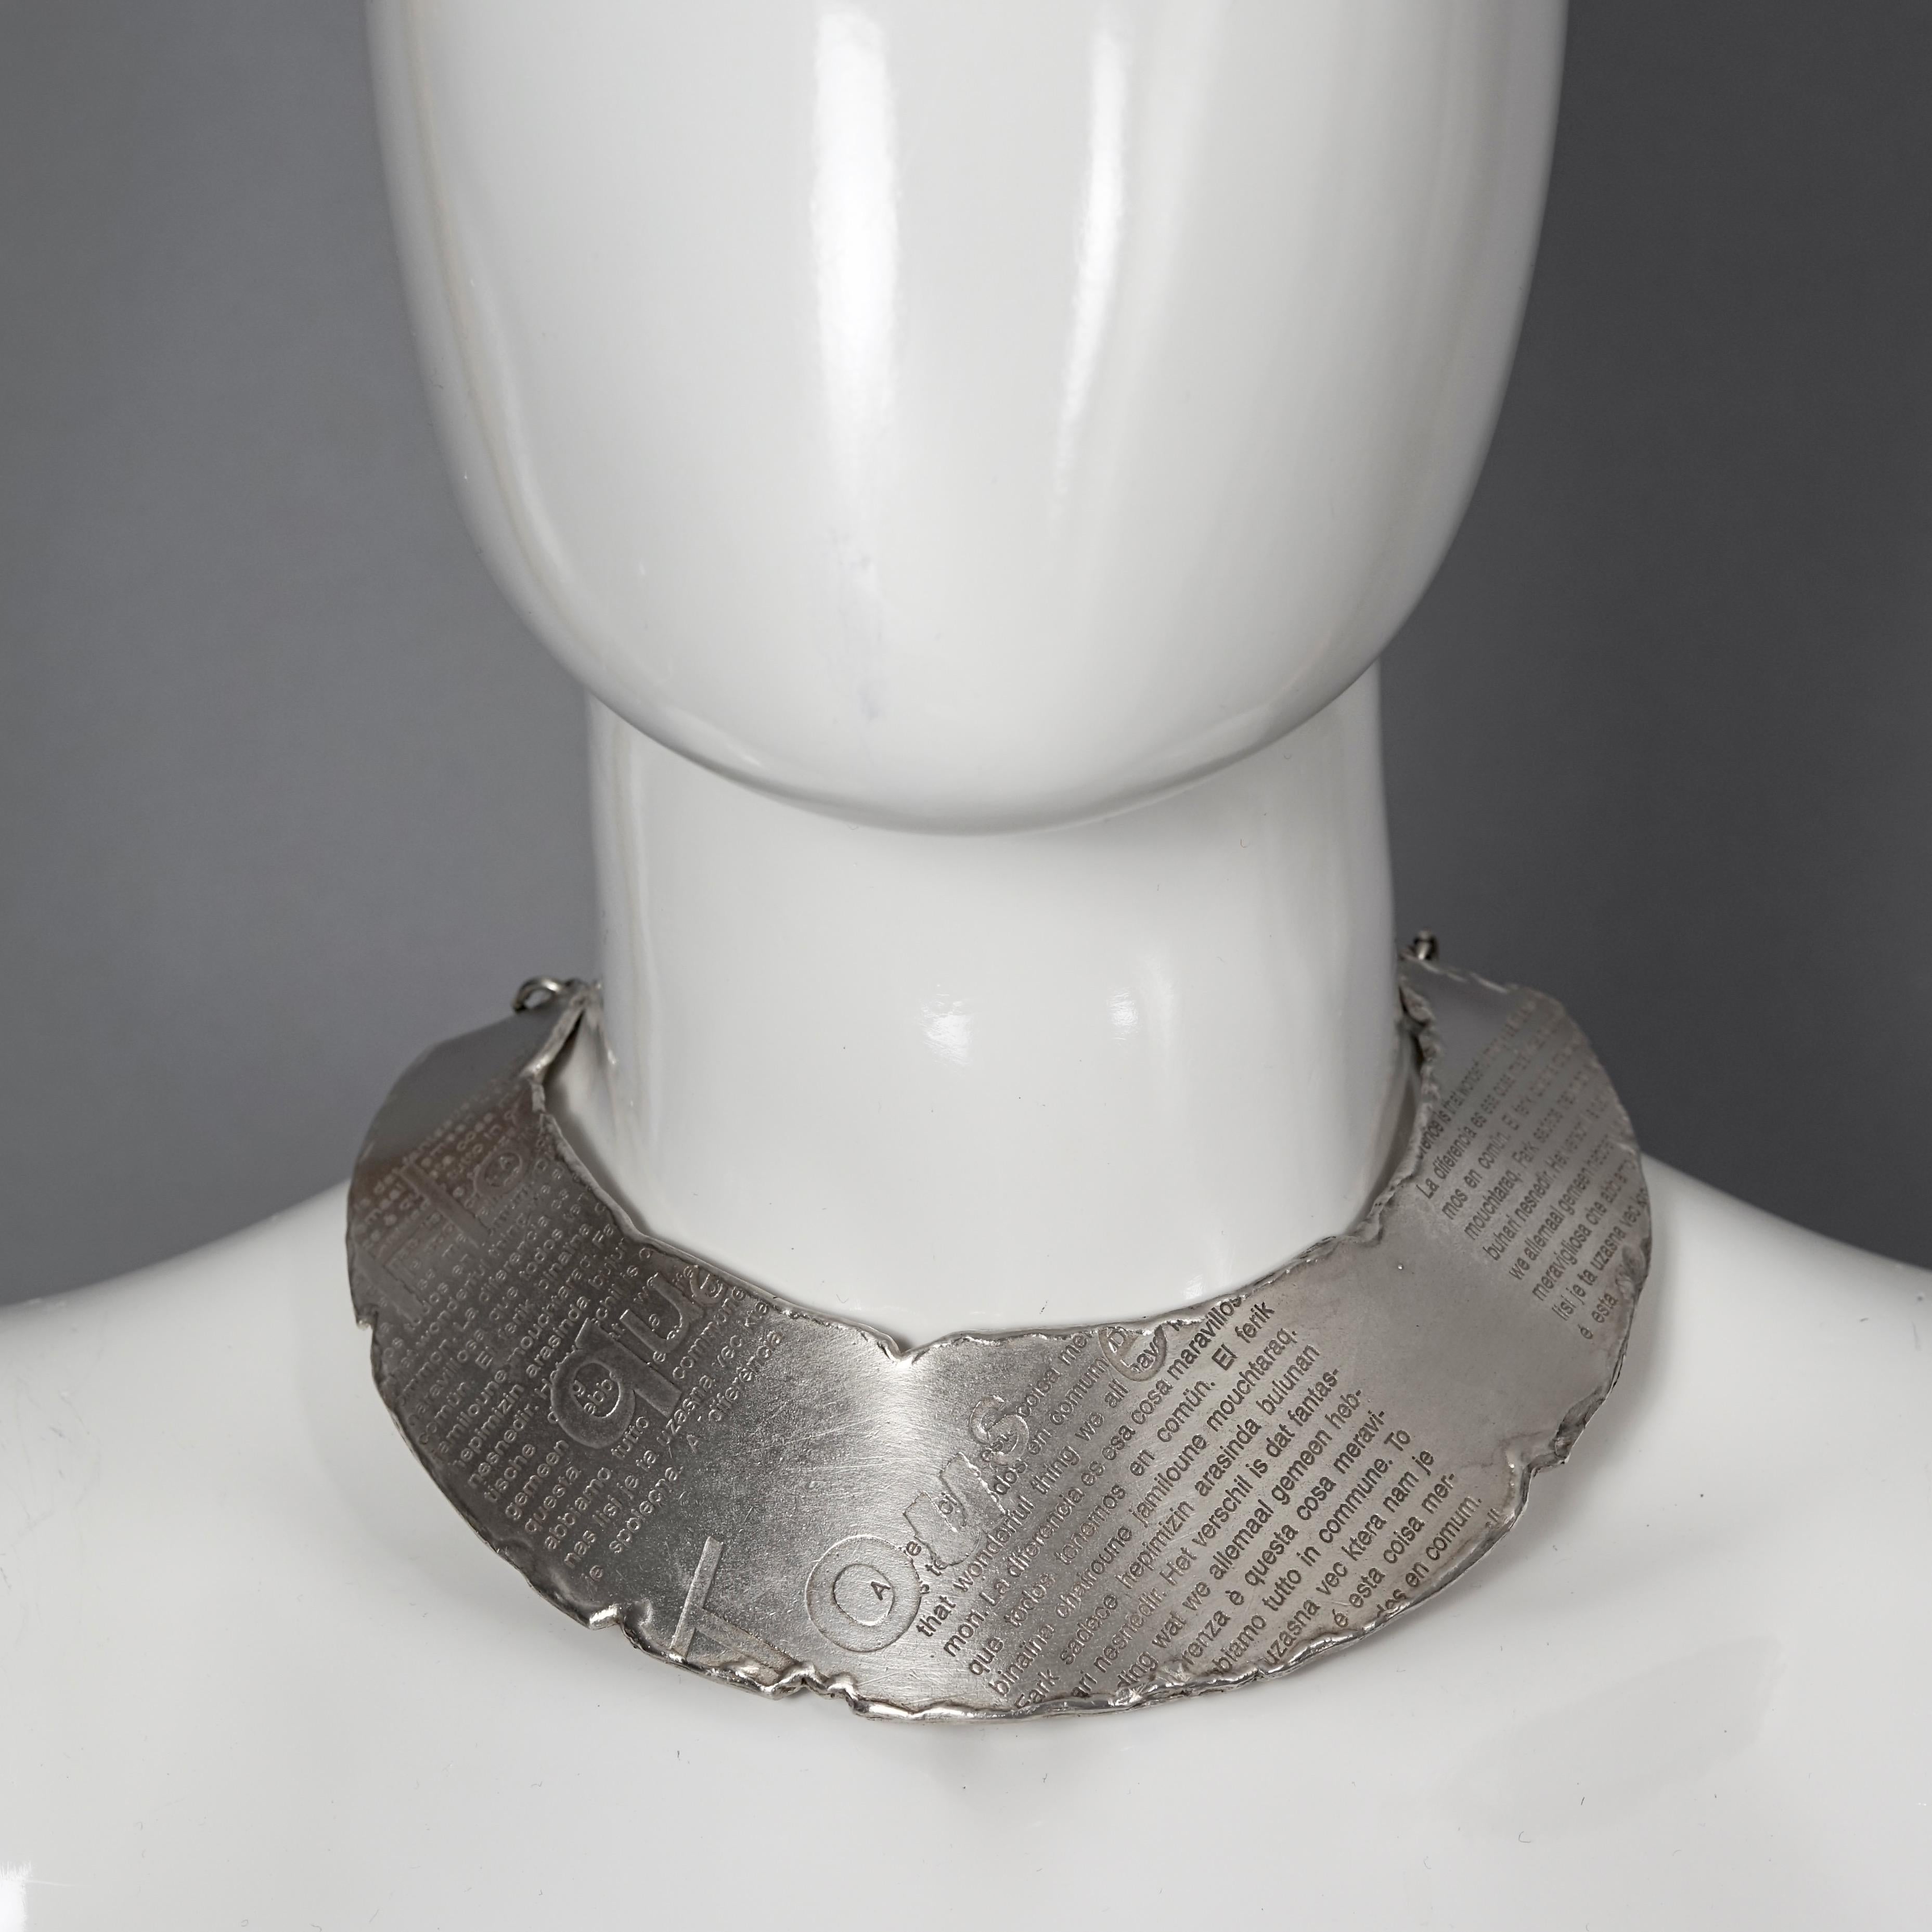 Vintage BICHE DE BERE Modernist Multilingual Statement Wide Choker Necklace
Limited edition. This is the 49th out of 147 pieces.

Measurements:
Height: 1.77 inches (4.5 cm)
Wearable Length: 14.17 inches (36 cm) max including the chain

Features:
-